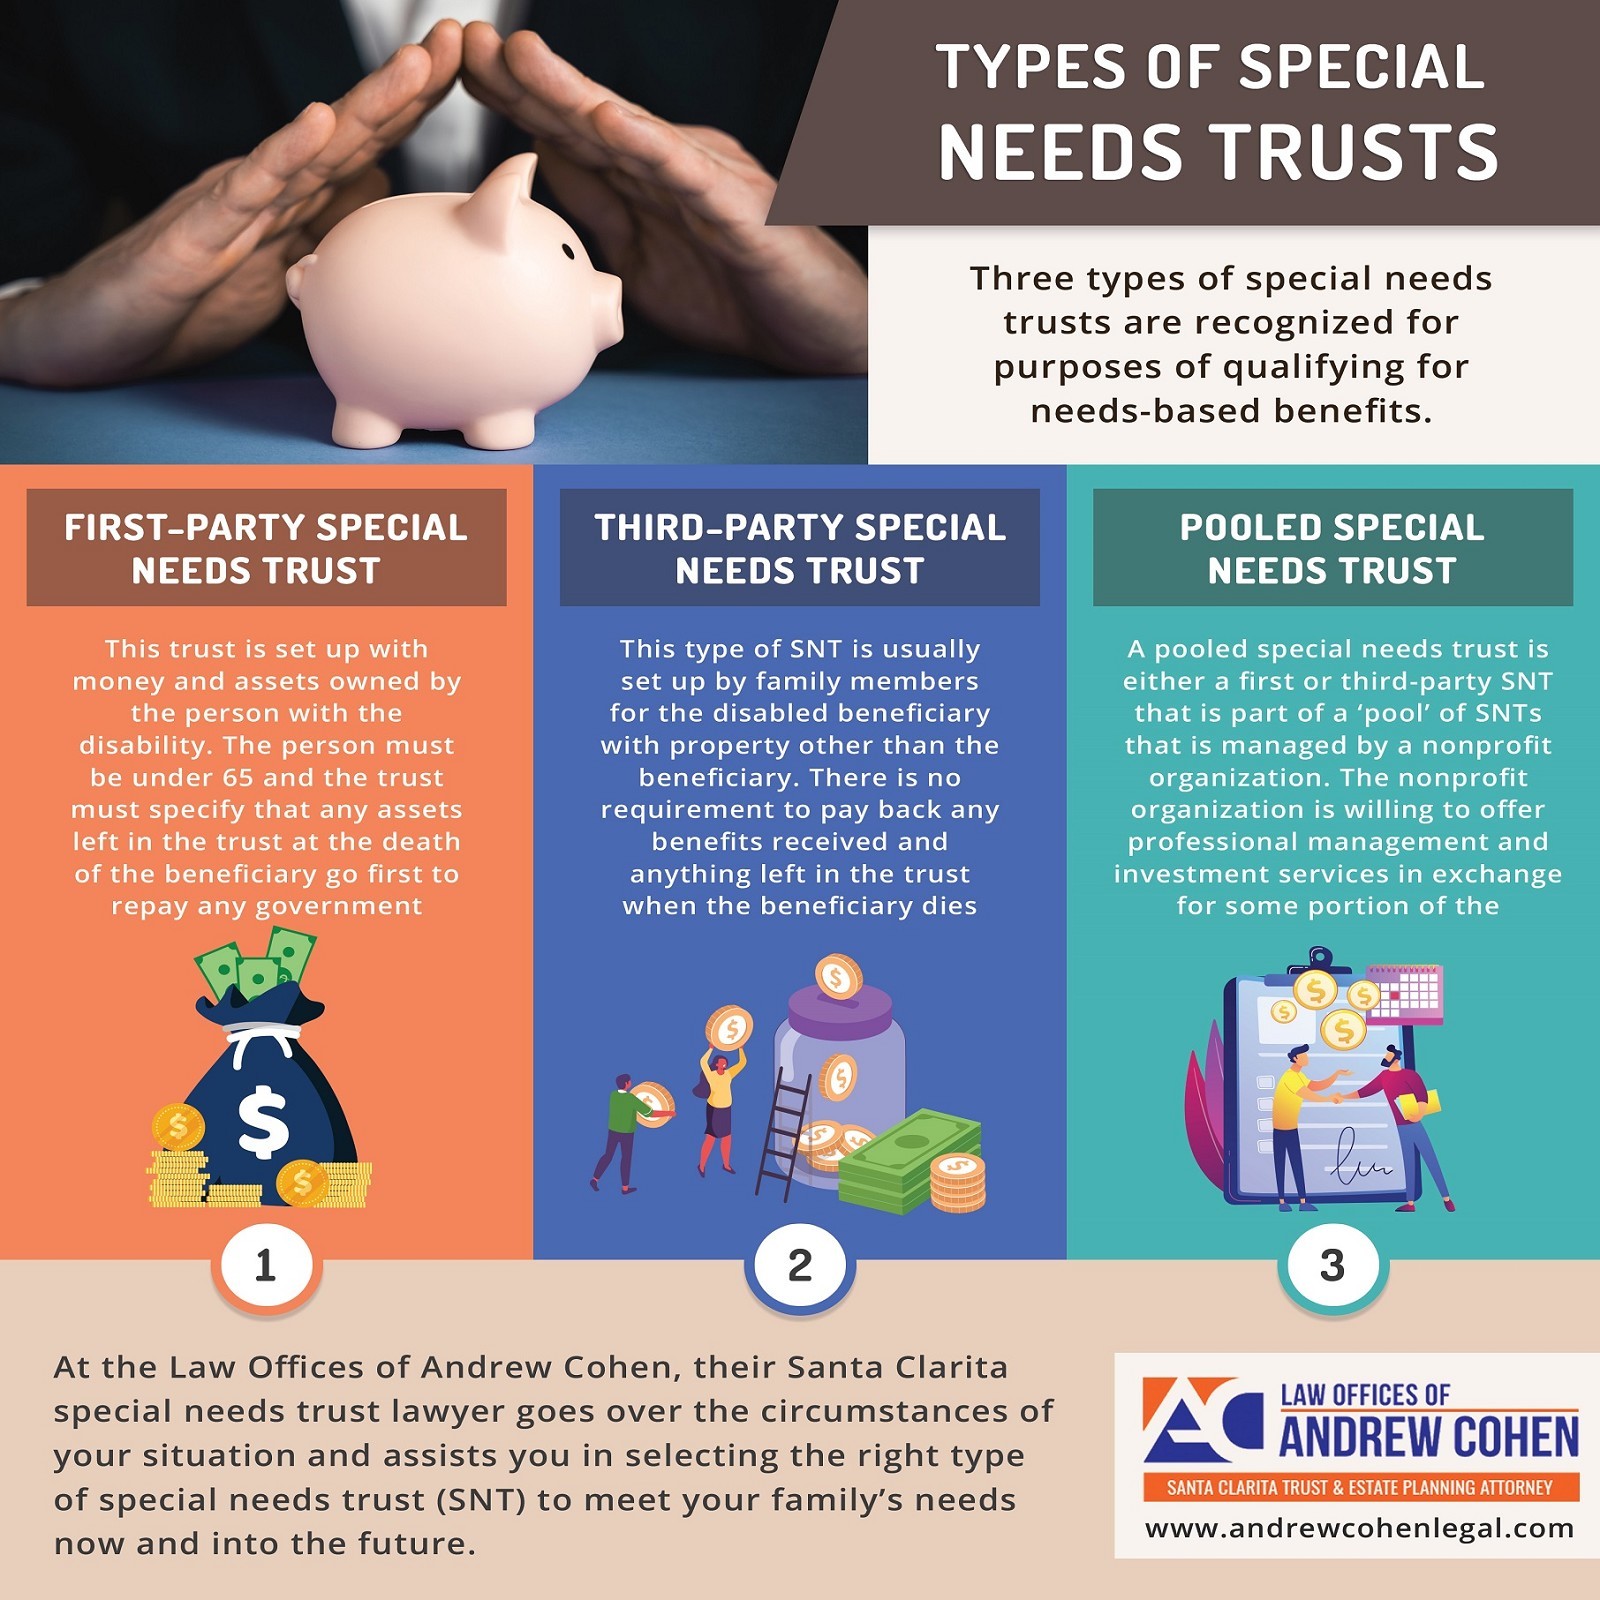 3 Types of Special Needs Trusts